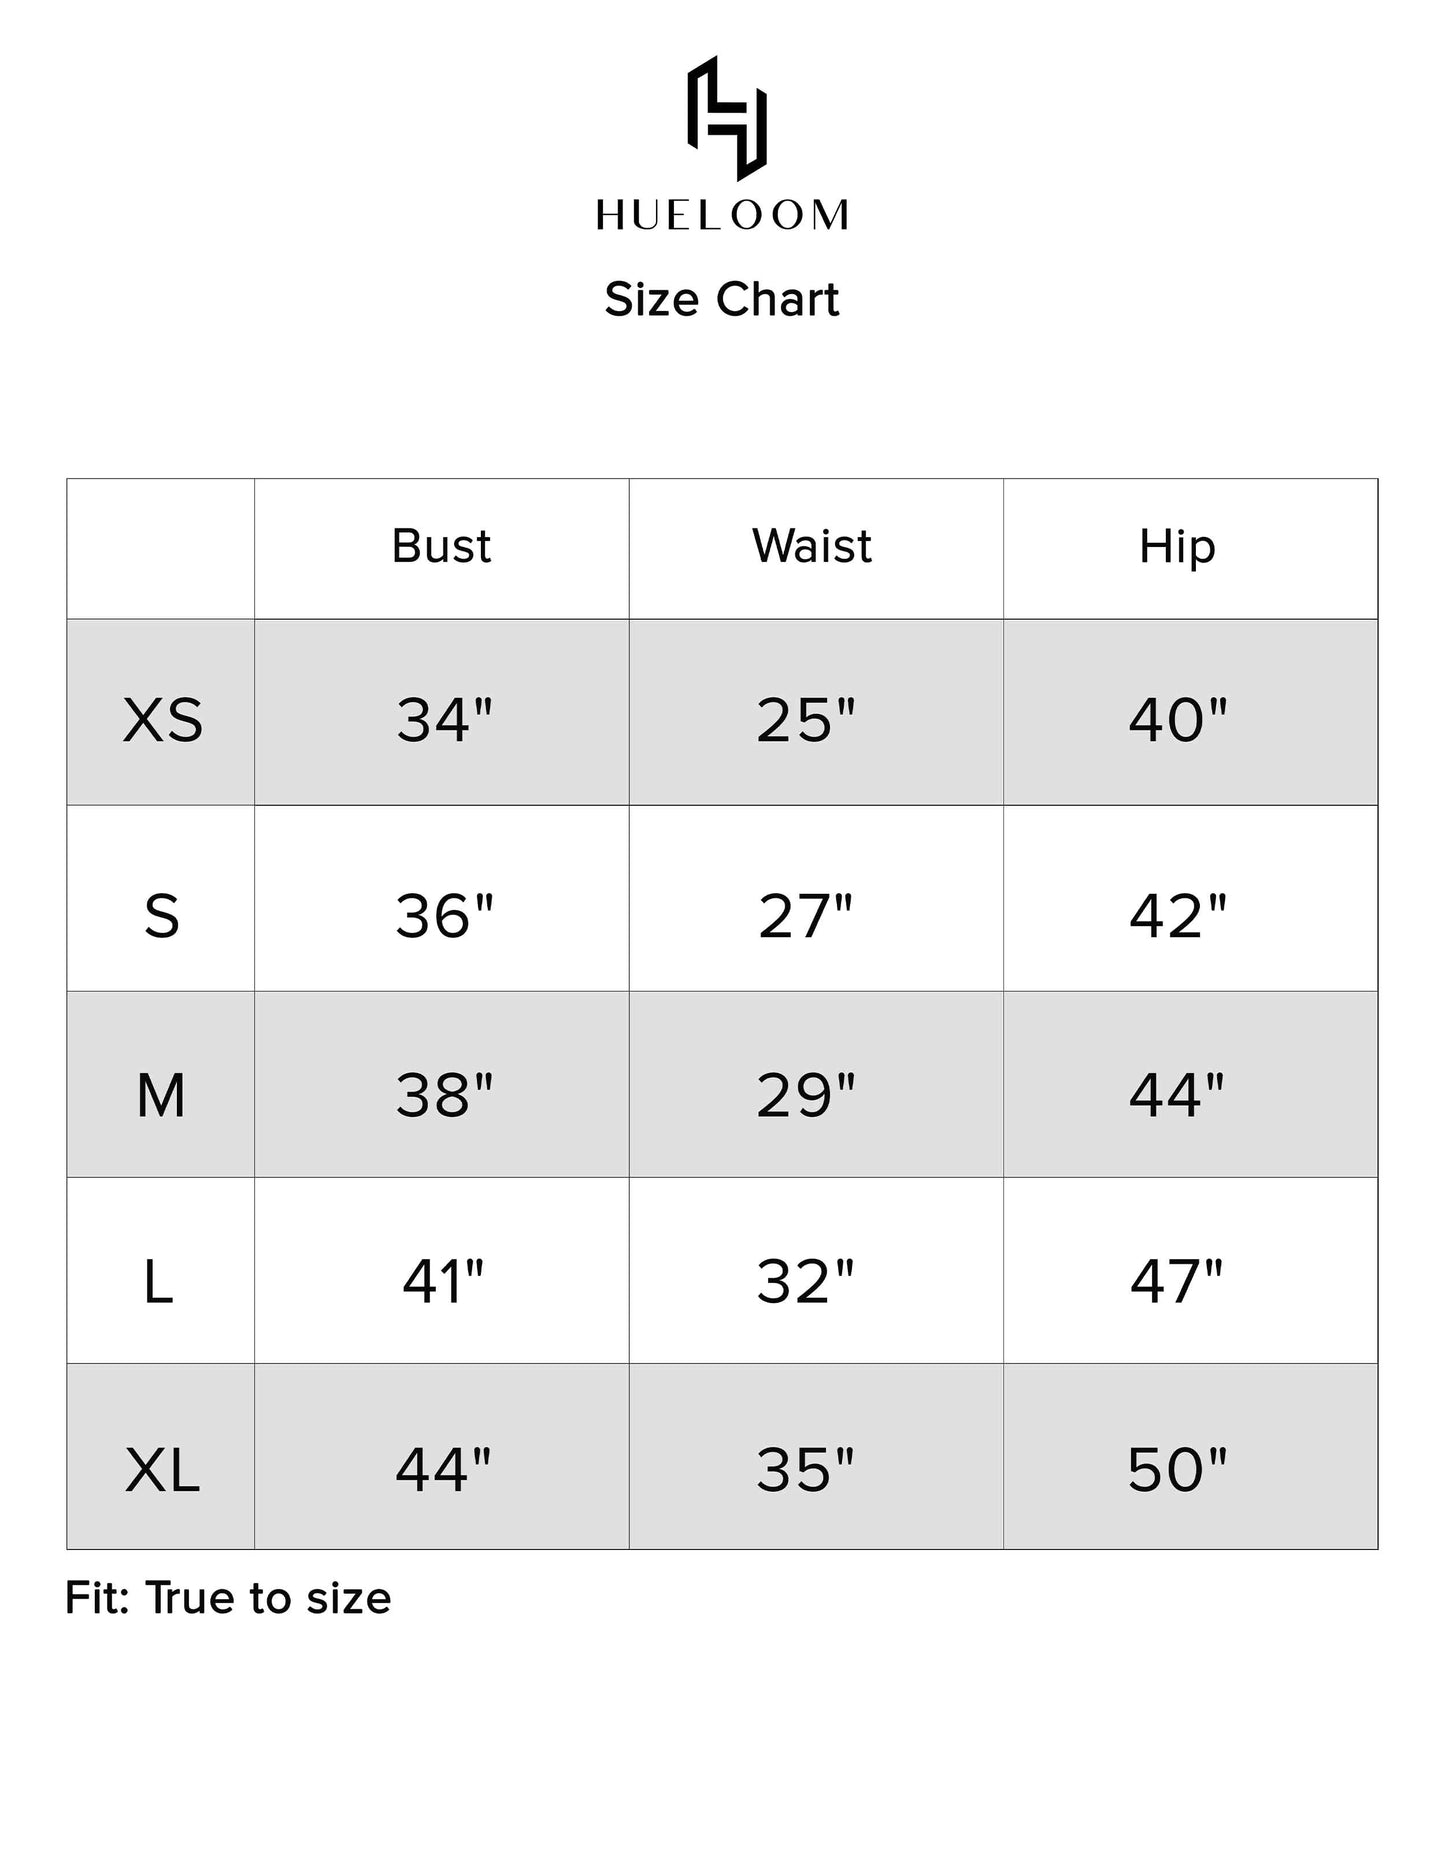 Hueloom's Elasticated Convertible Midi Dress's size chart guide for sizes XS, S, M, L, XL 